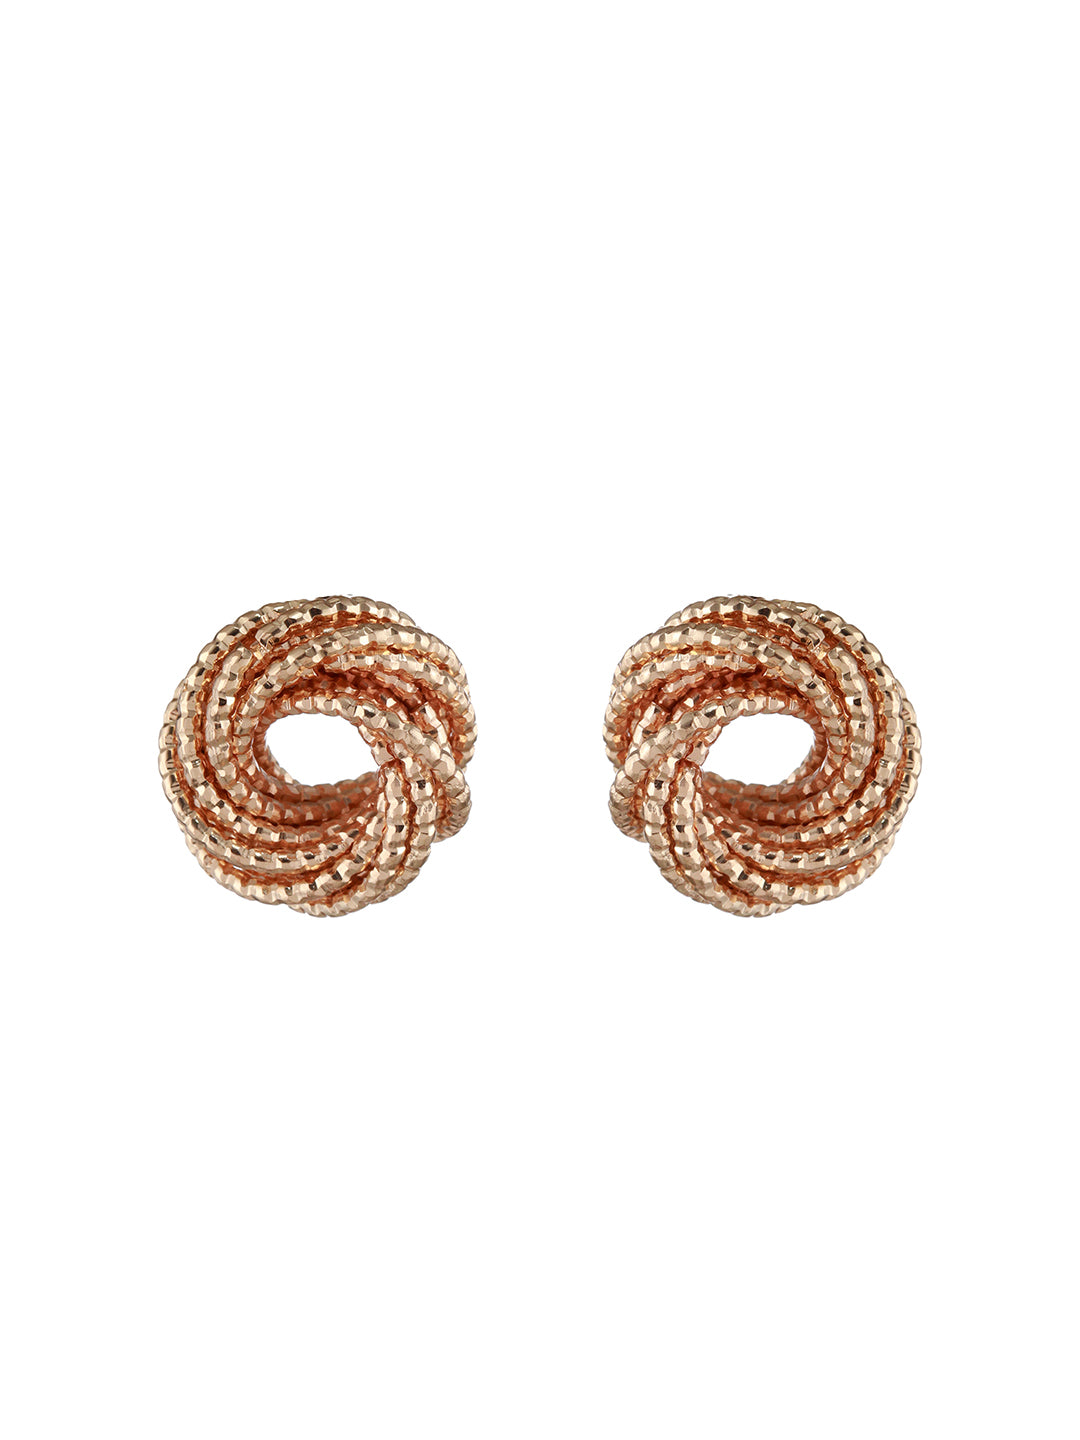 Textured Whirled Wires Rose Gold-Plated Earrings